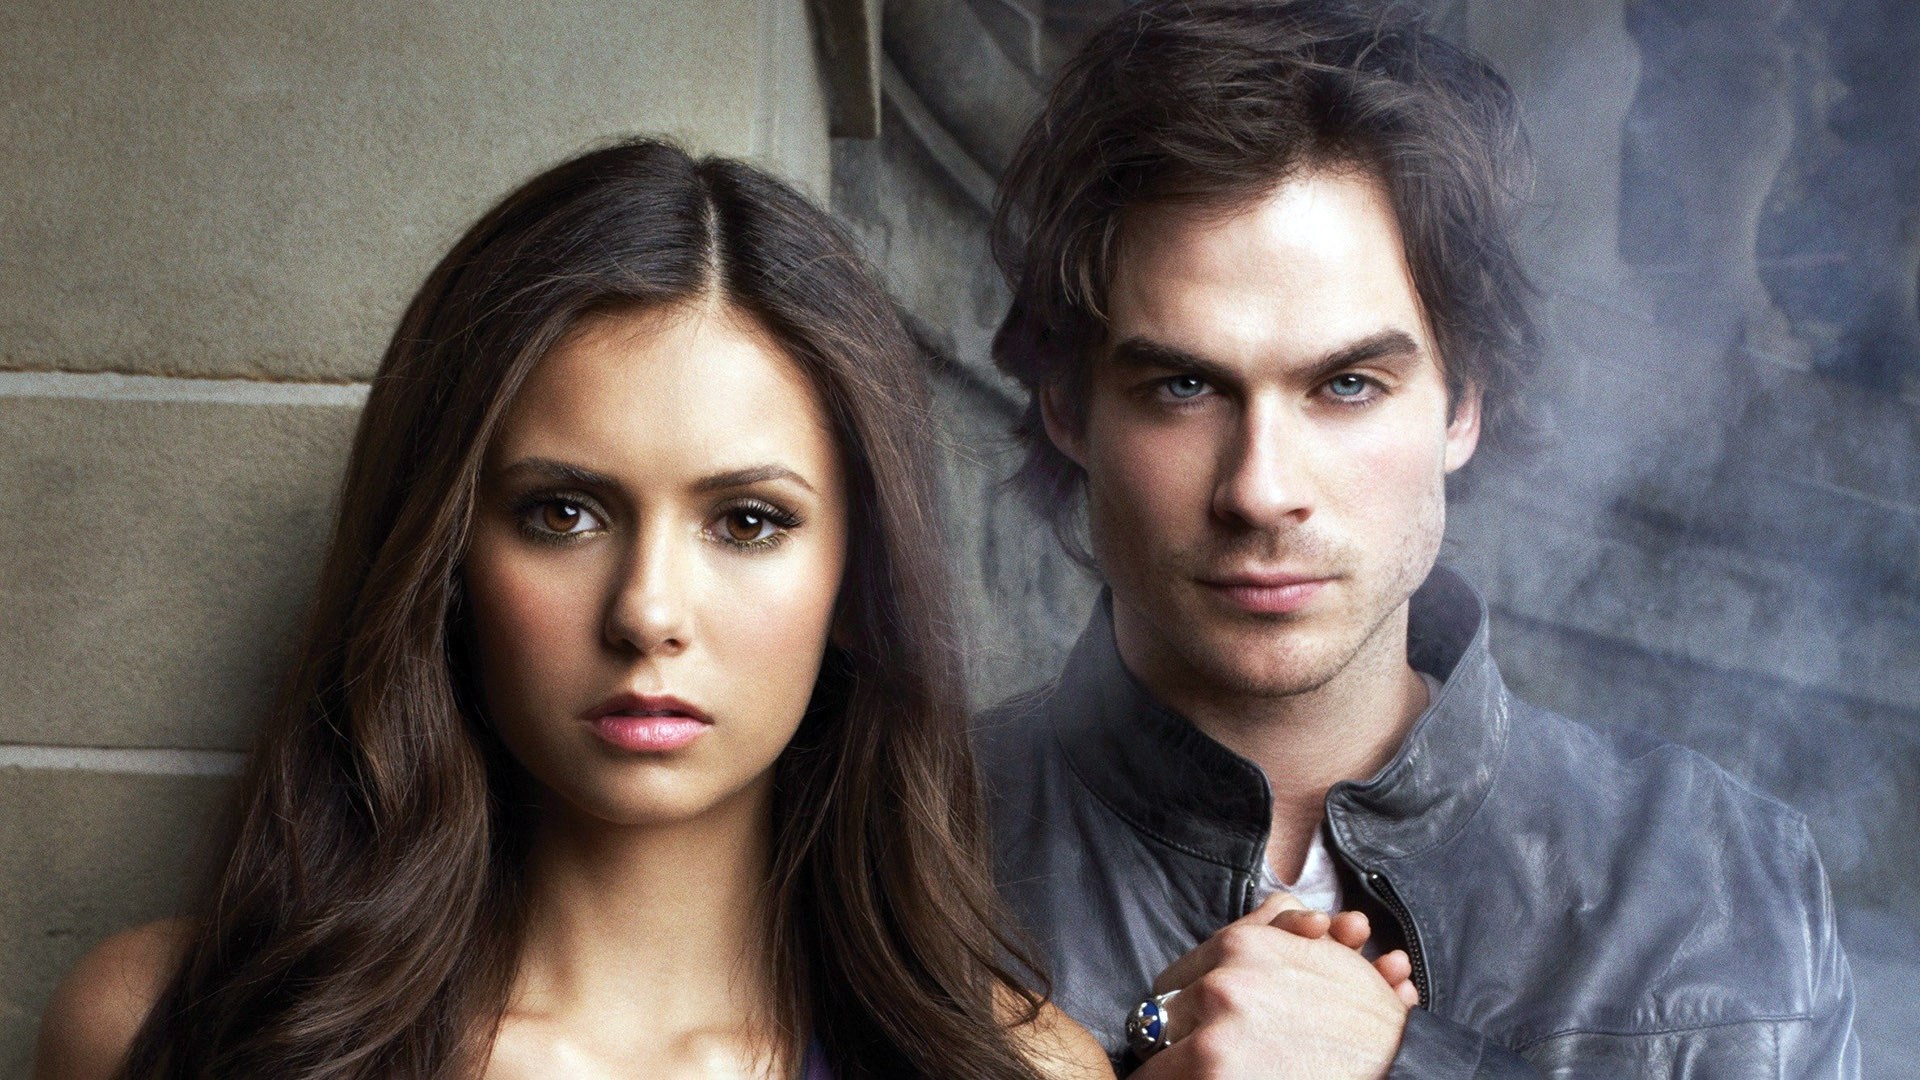 15 Lesser-Known TV Shows to Watch If You Miss Vampire Diaries